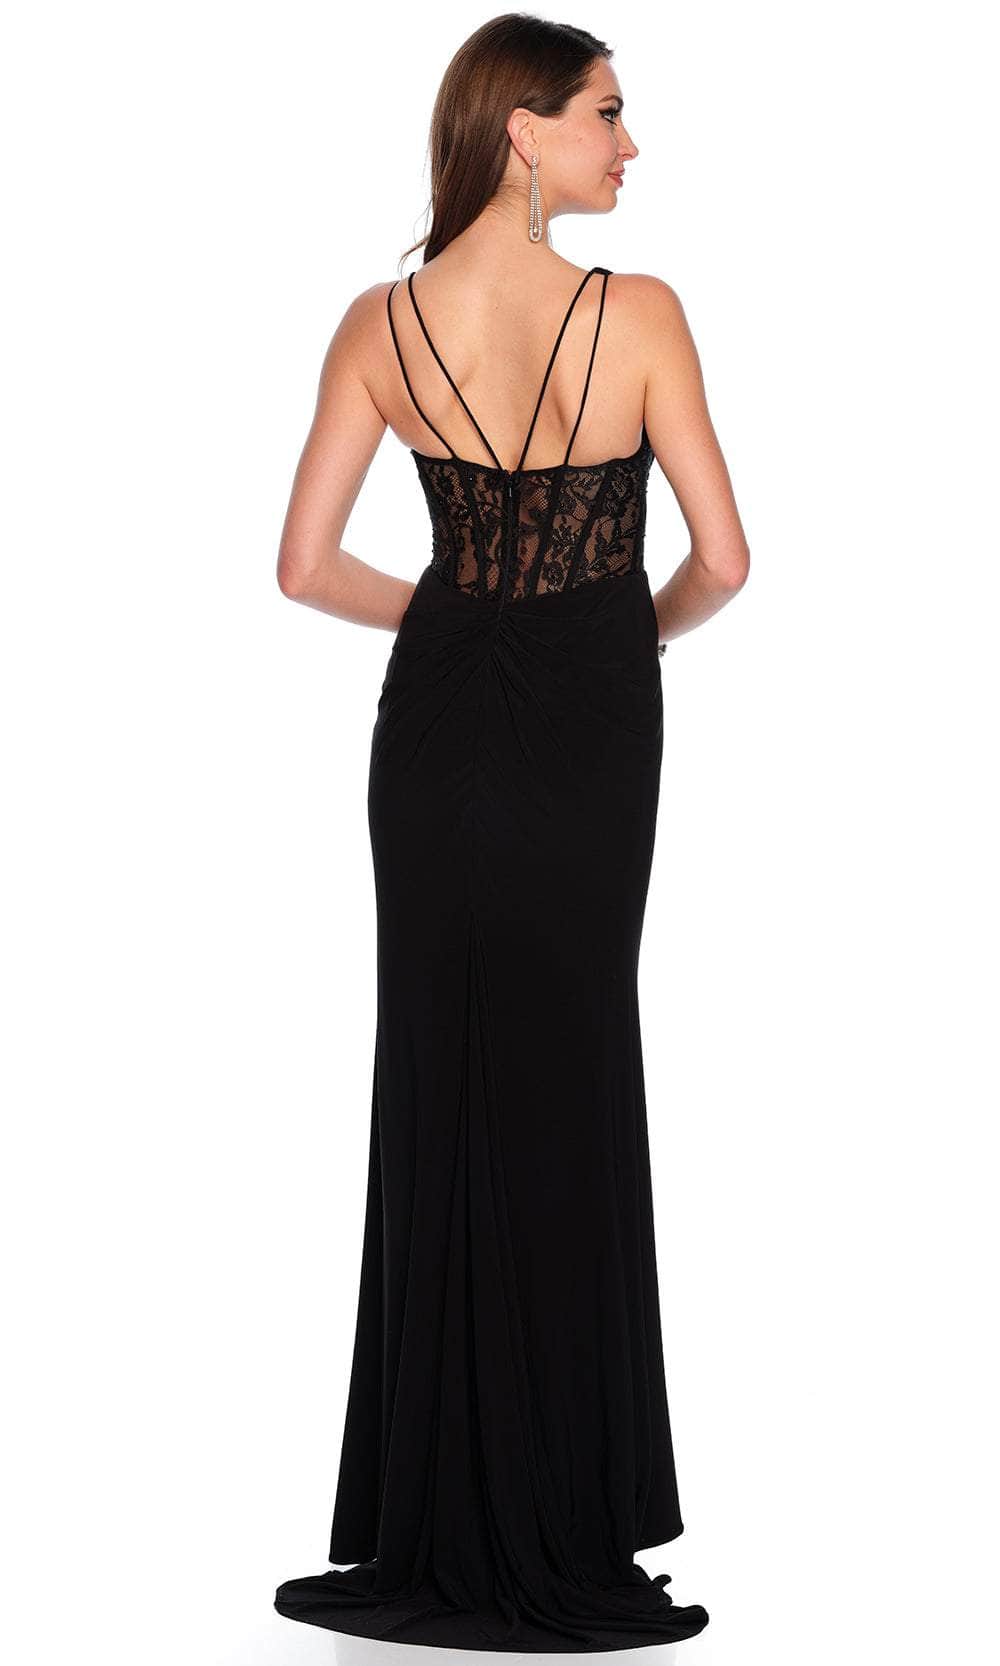 Image of Dave & Johnny 11450 - Sleeveless Lace Corset Prom Gown